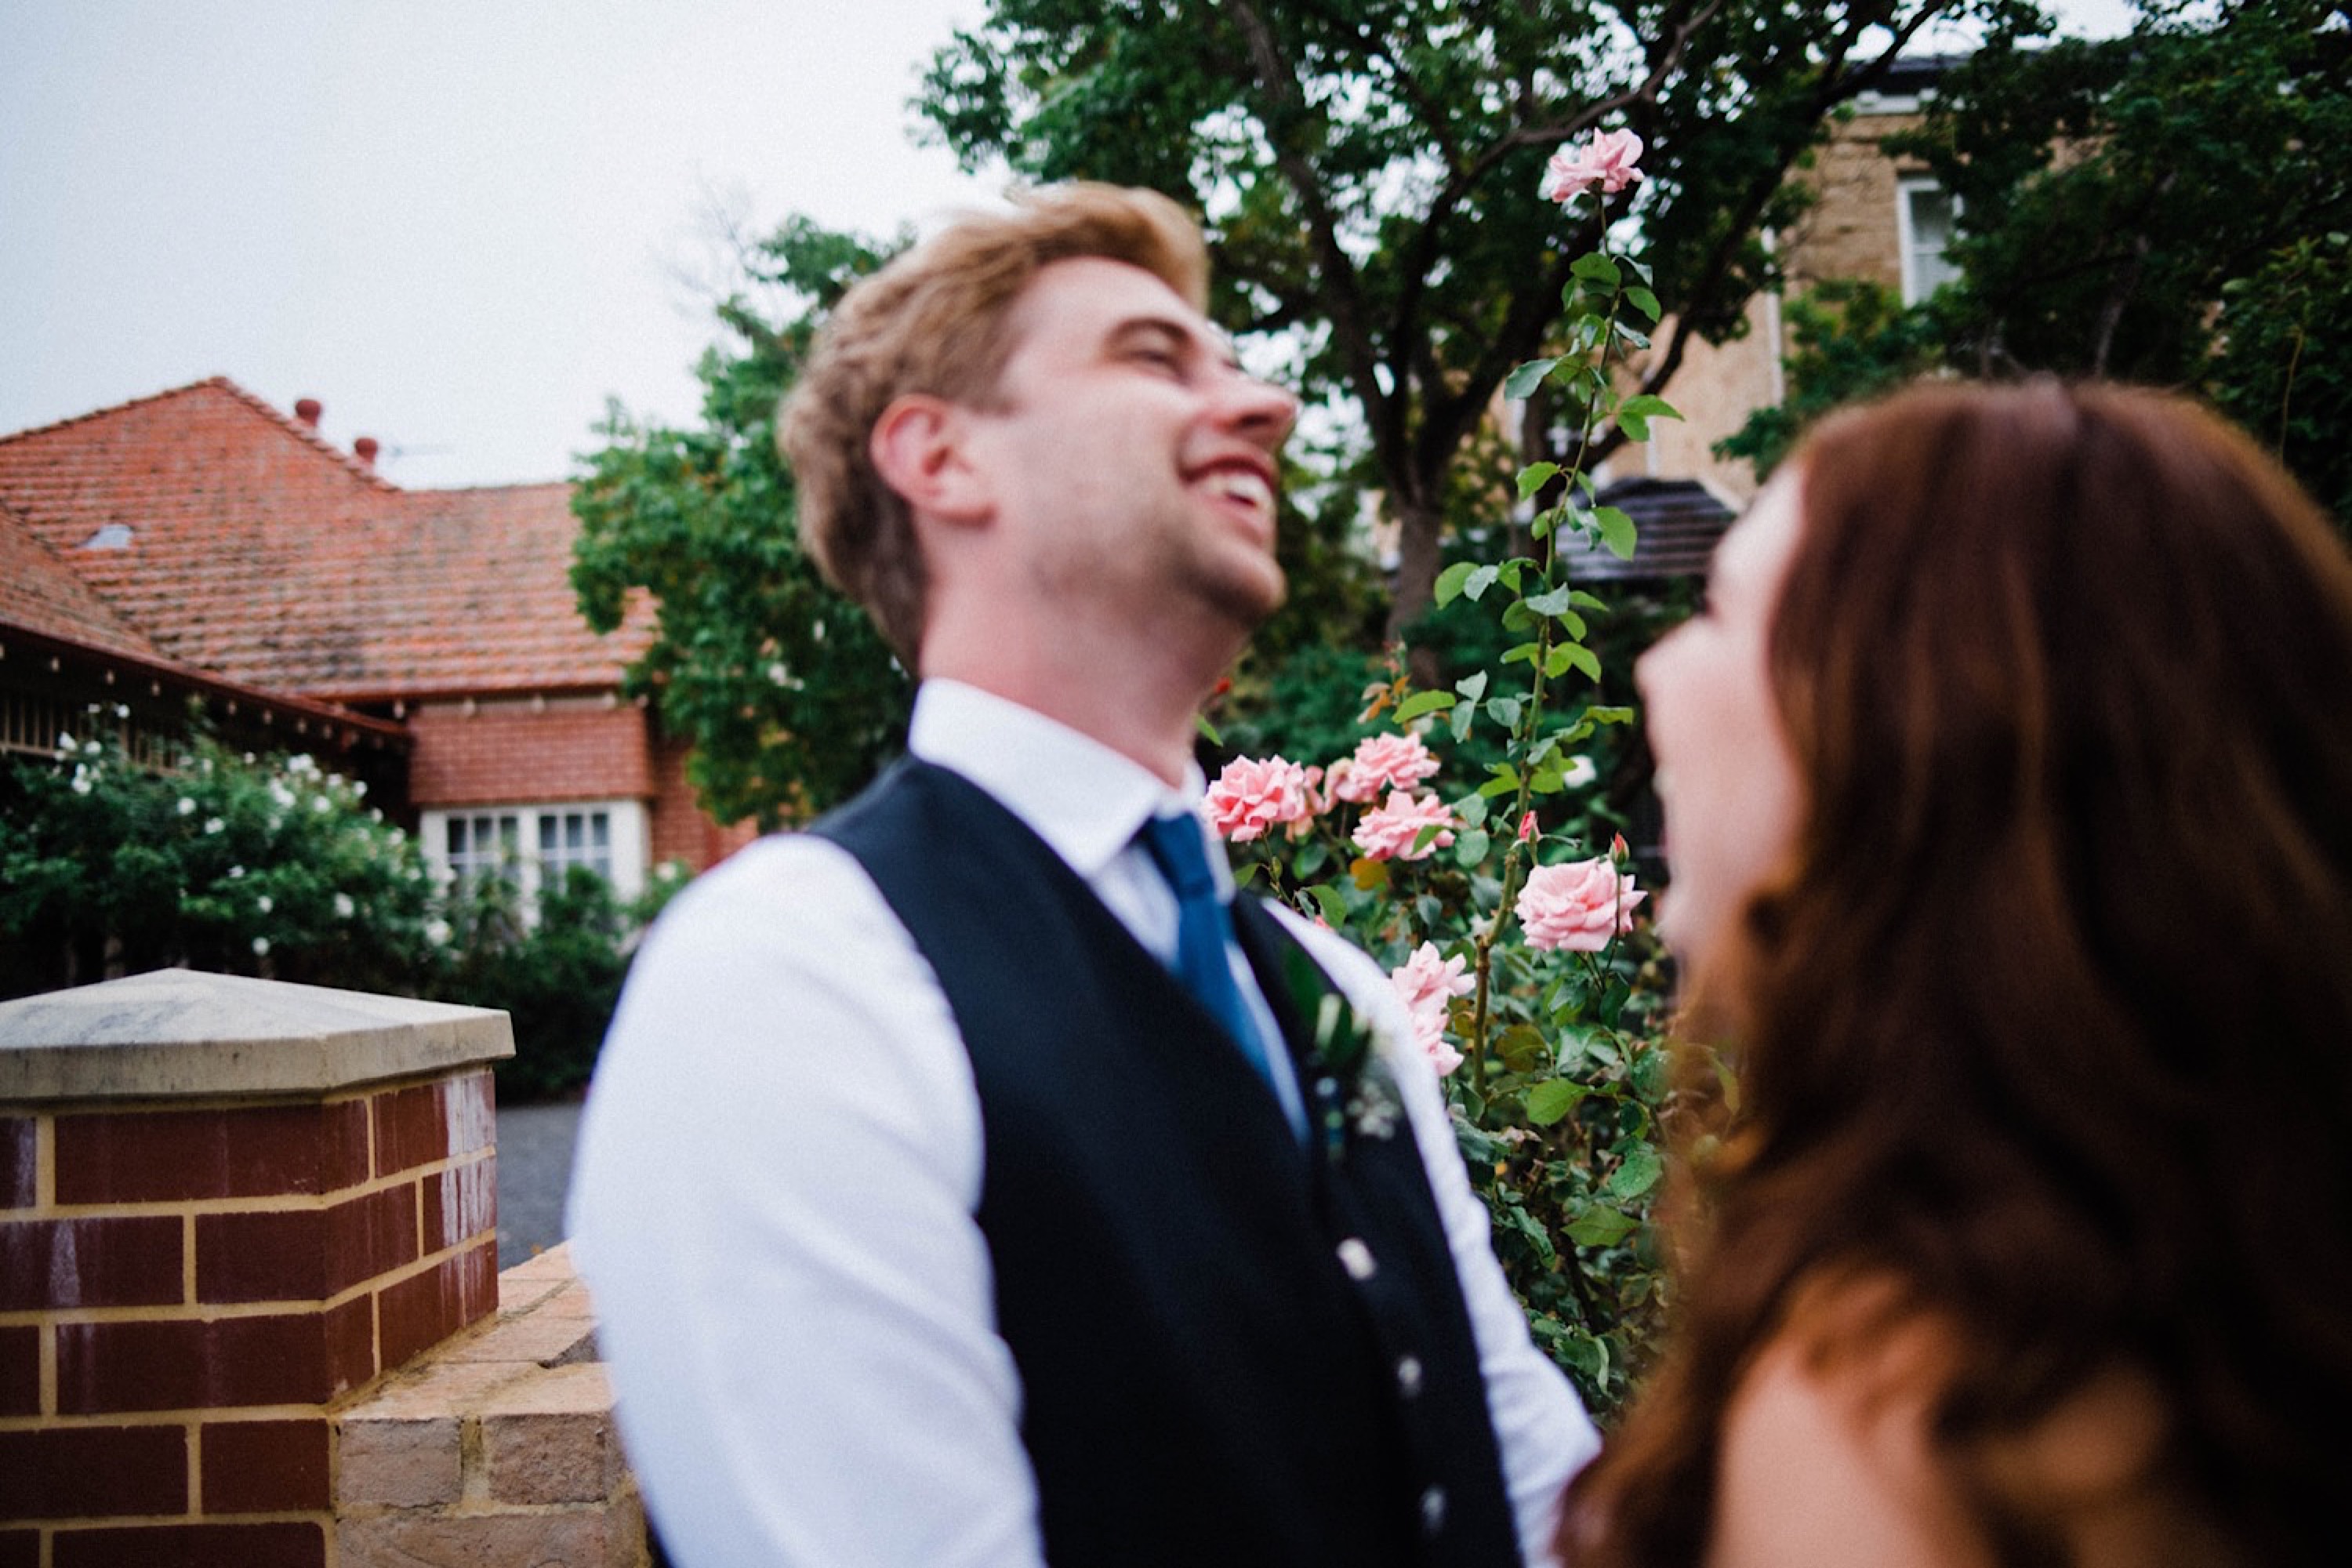 A candid wedding portriat of the groom leaning back and laughing in front of a rose garden.